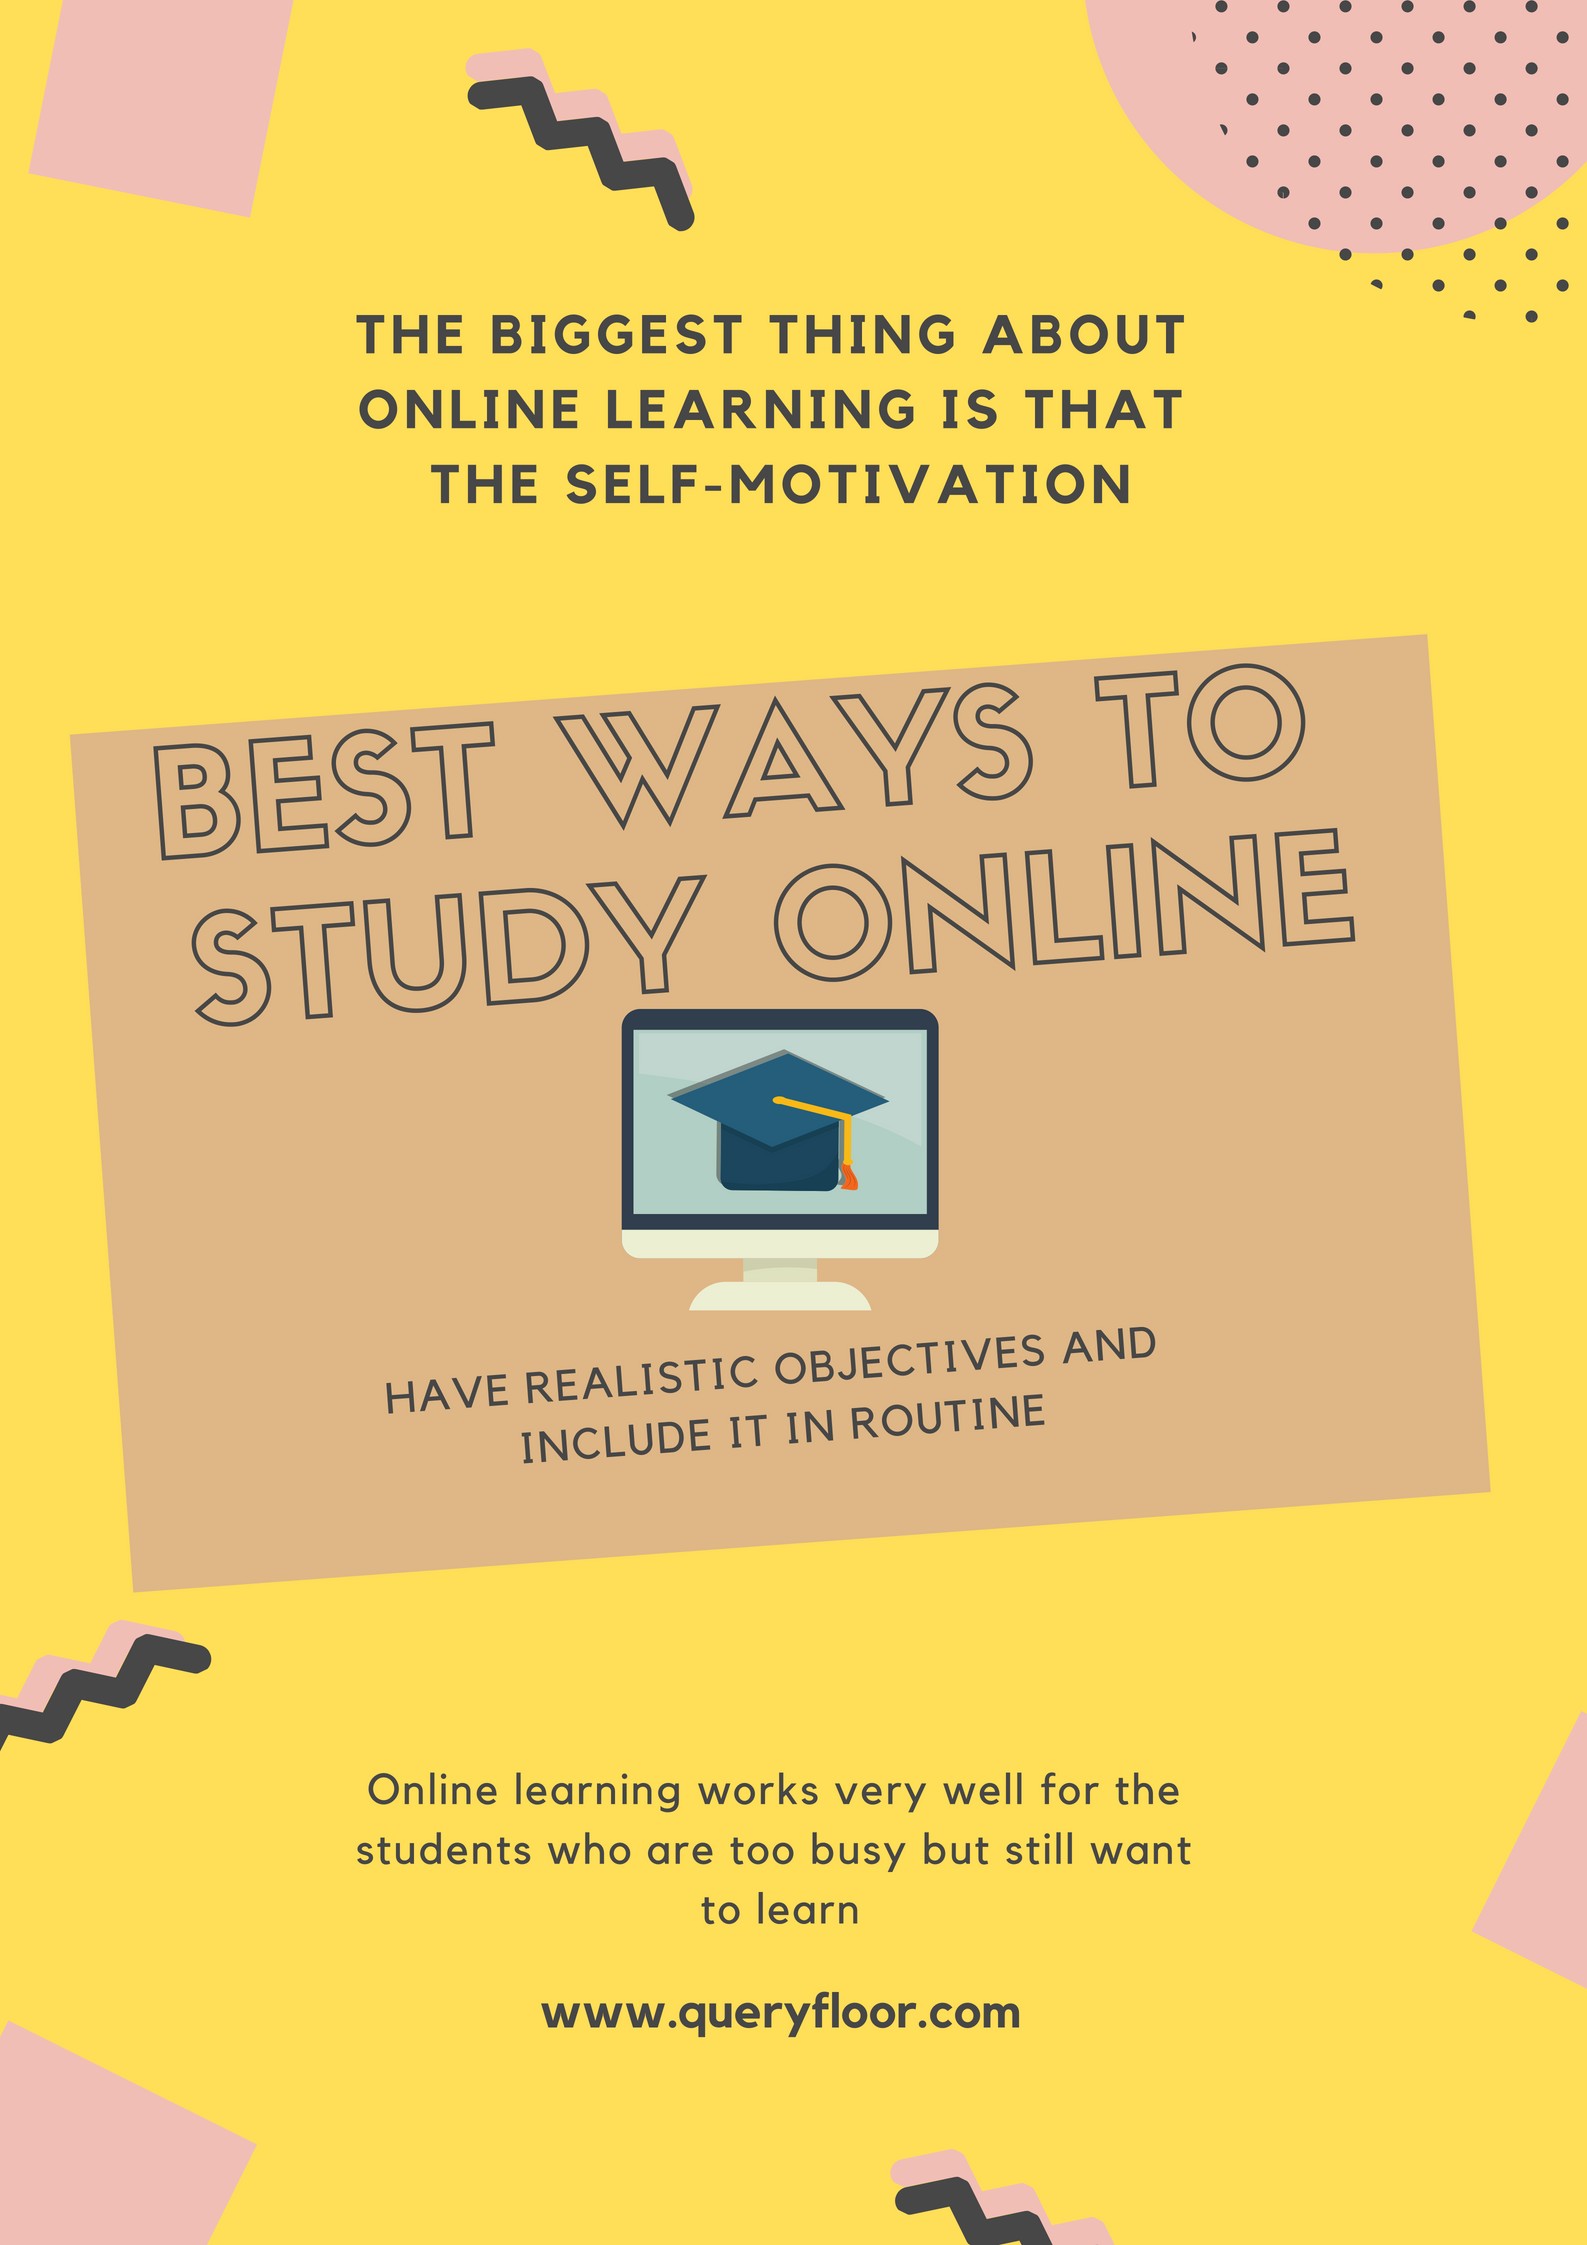 How to study online for the best results